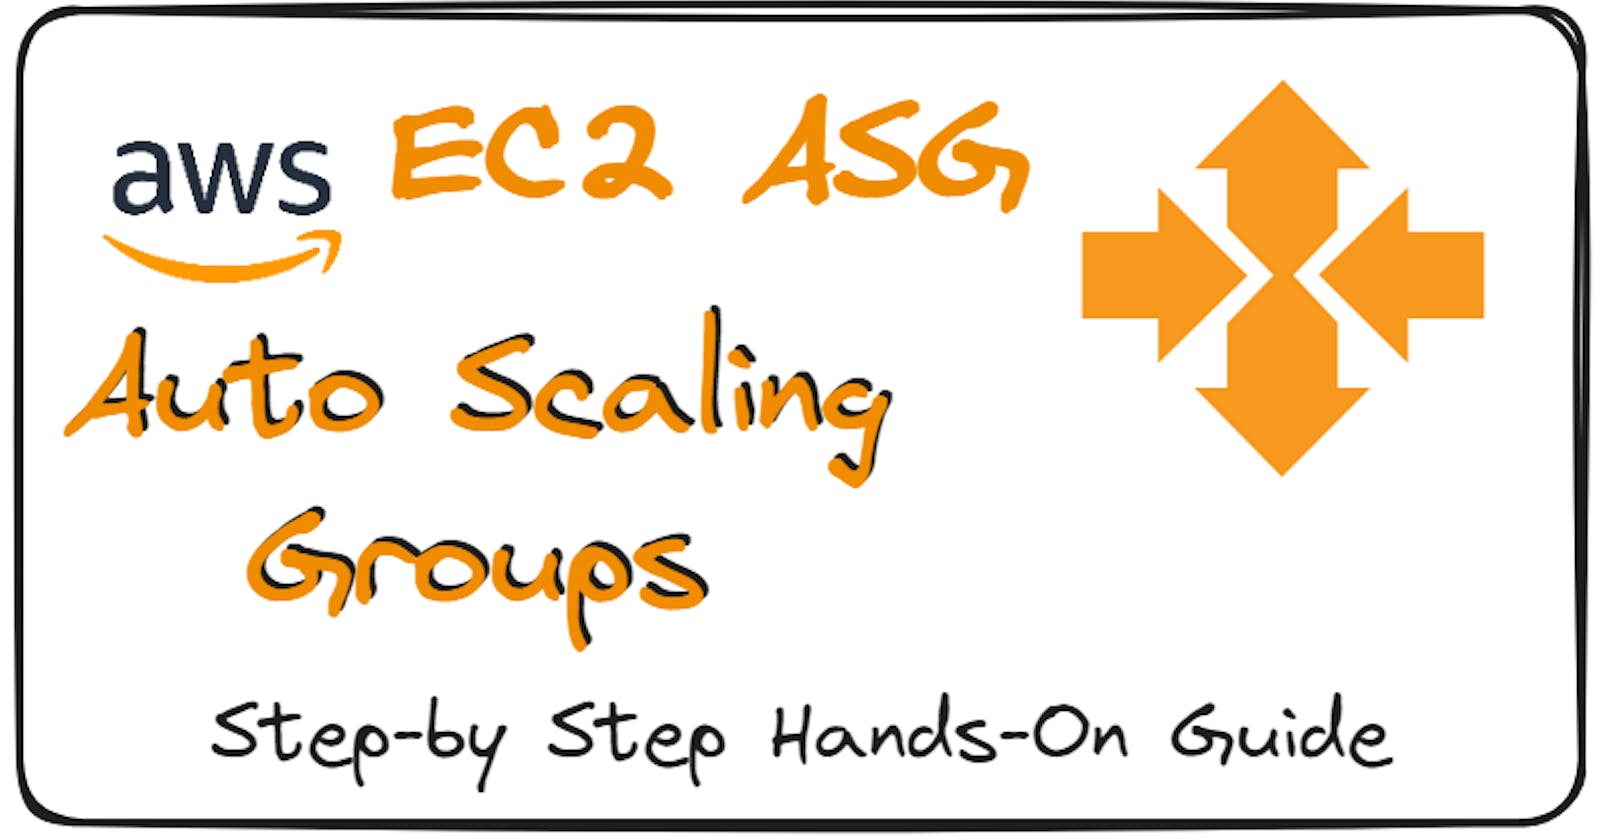 AWS EC2 ASG Hands-On | A Step-by-Step Guide